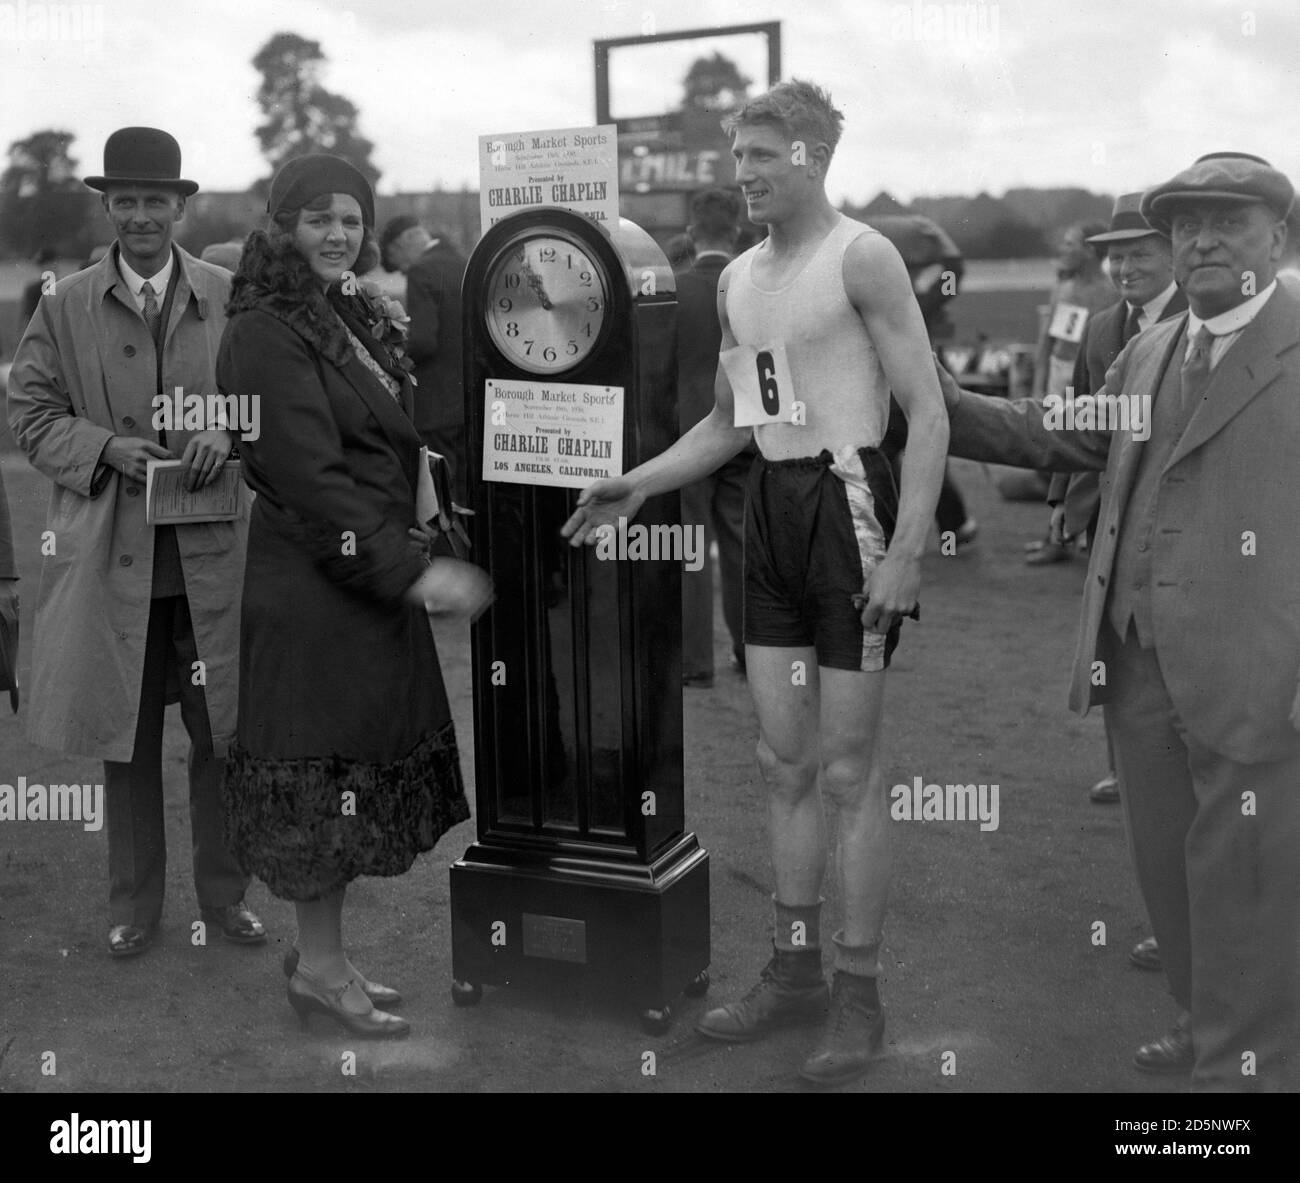 A grandfather clock donated by Charlie Chaplin, the famous film star, was the first prize in the one-mile race at Herne Hill. Mrs Richardson presents the clock to J. Reynolds, winner of the race. Stock Photo